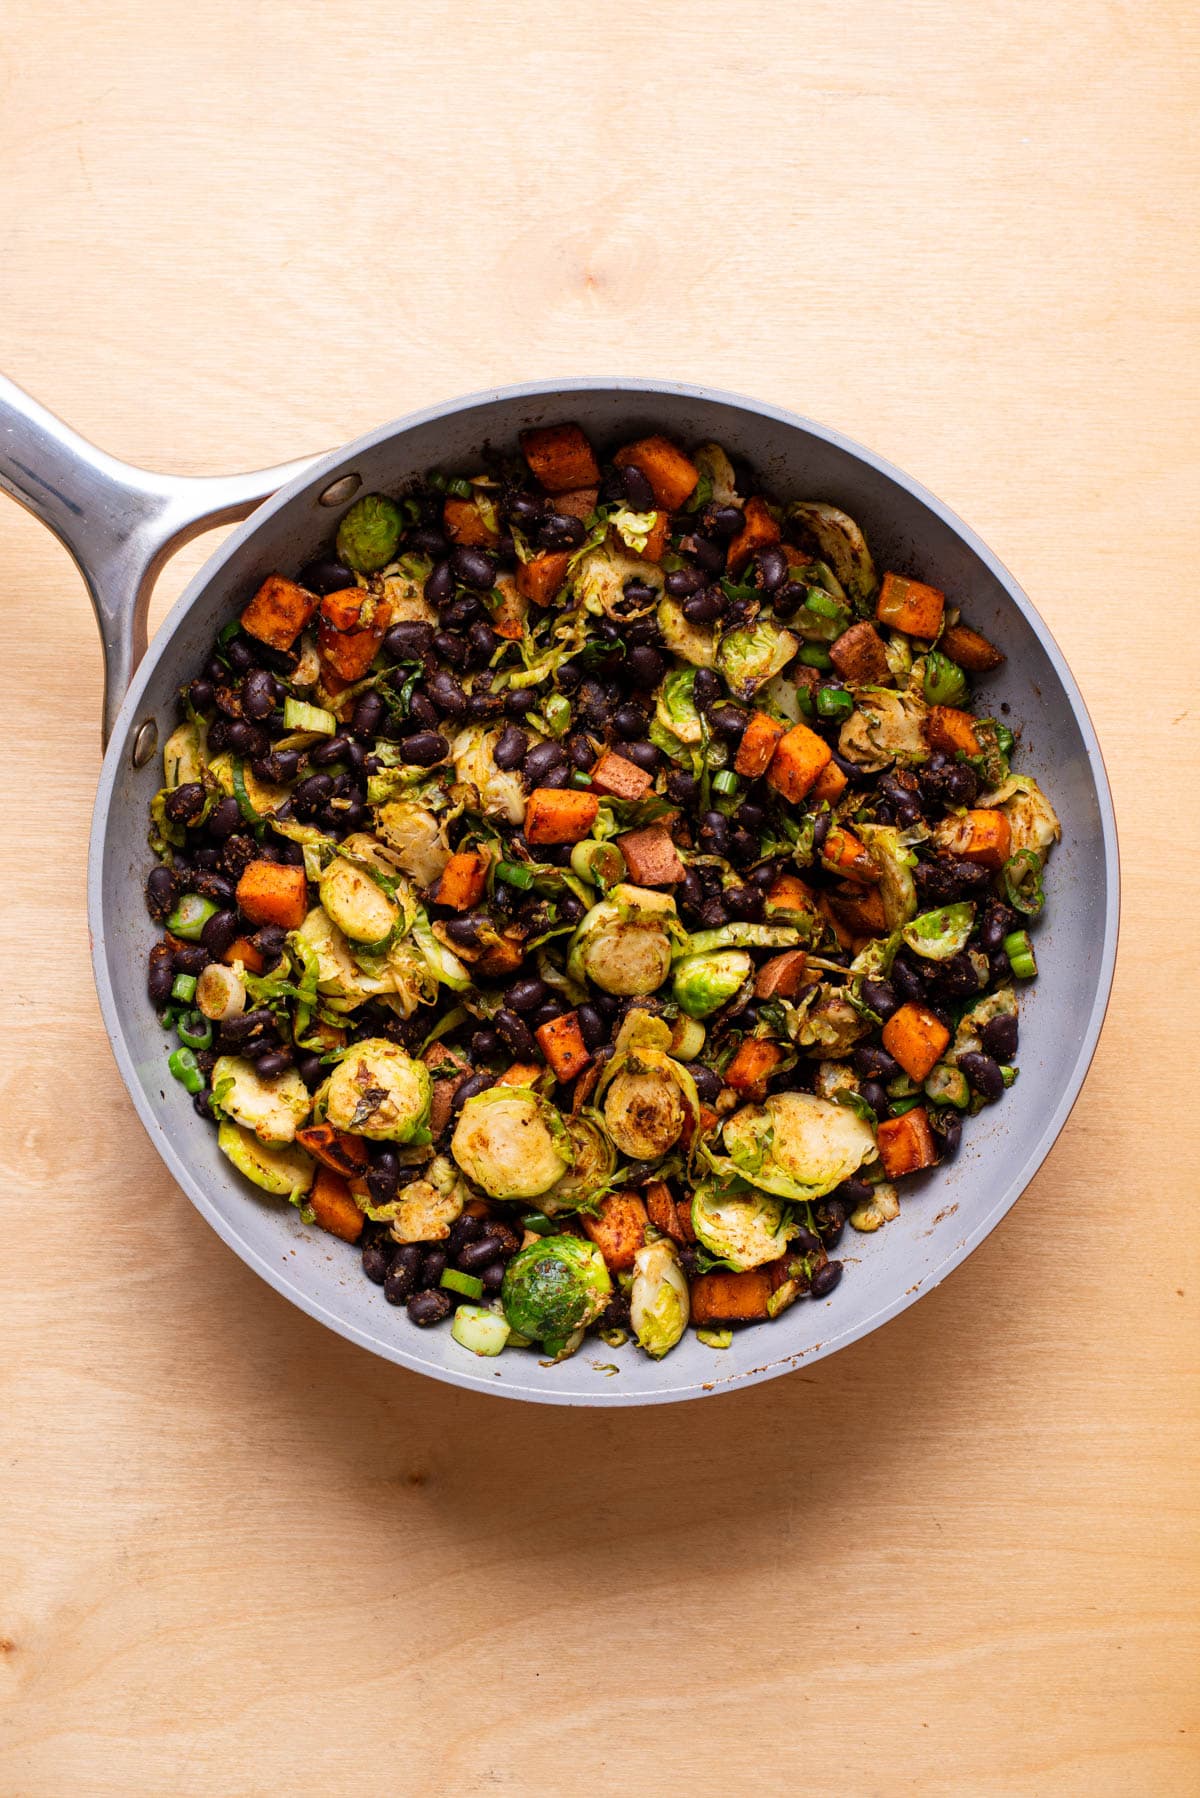 Vegan breakfast hash with vegetables and black beans in a skillet.